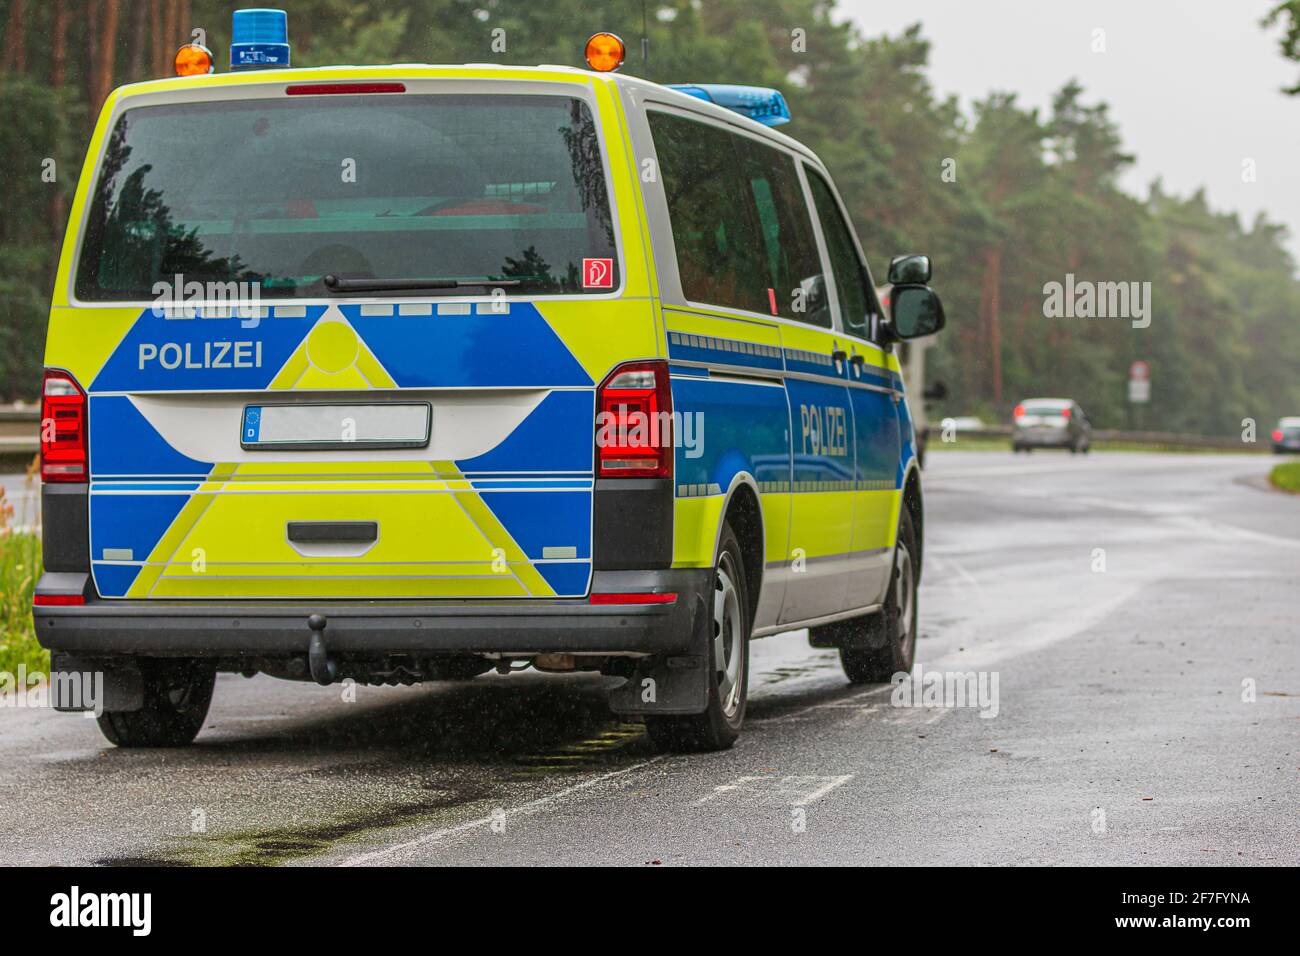 Police car in an emergency stop next to the motorway from the state of Brandenburg. Police vehicle in blue and yellow paintwork with reflective strips Stock Photo